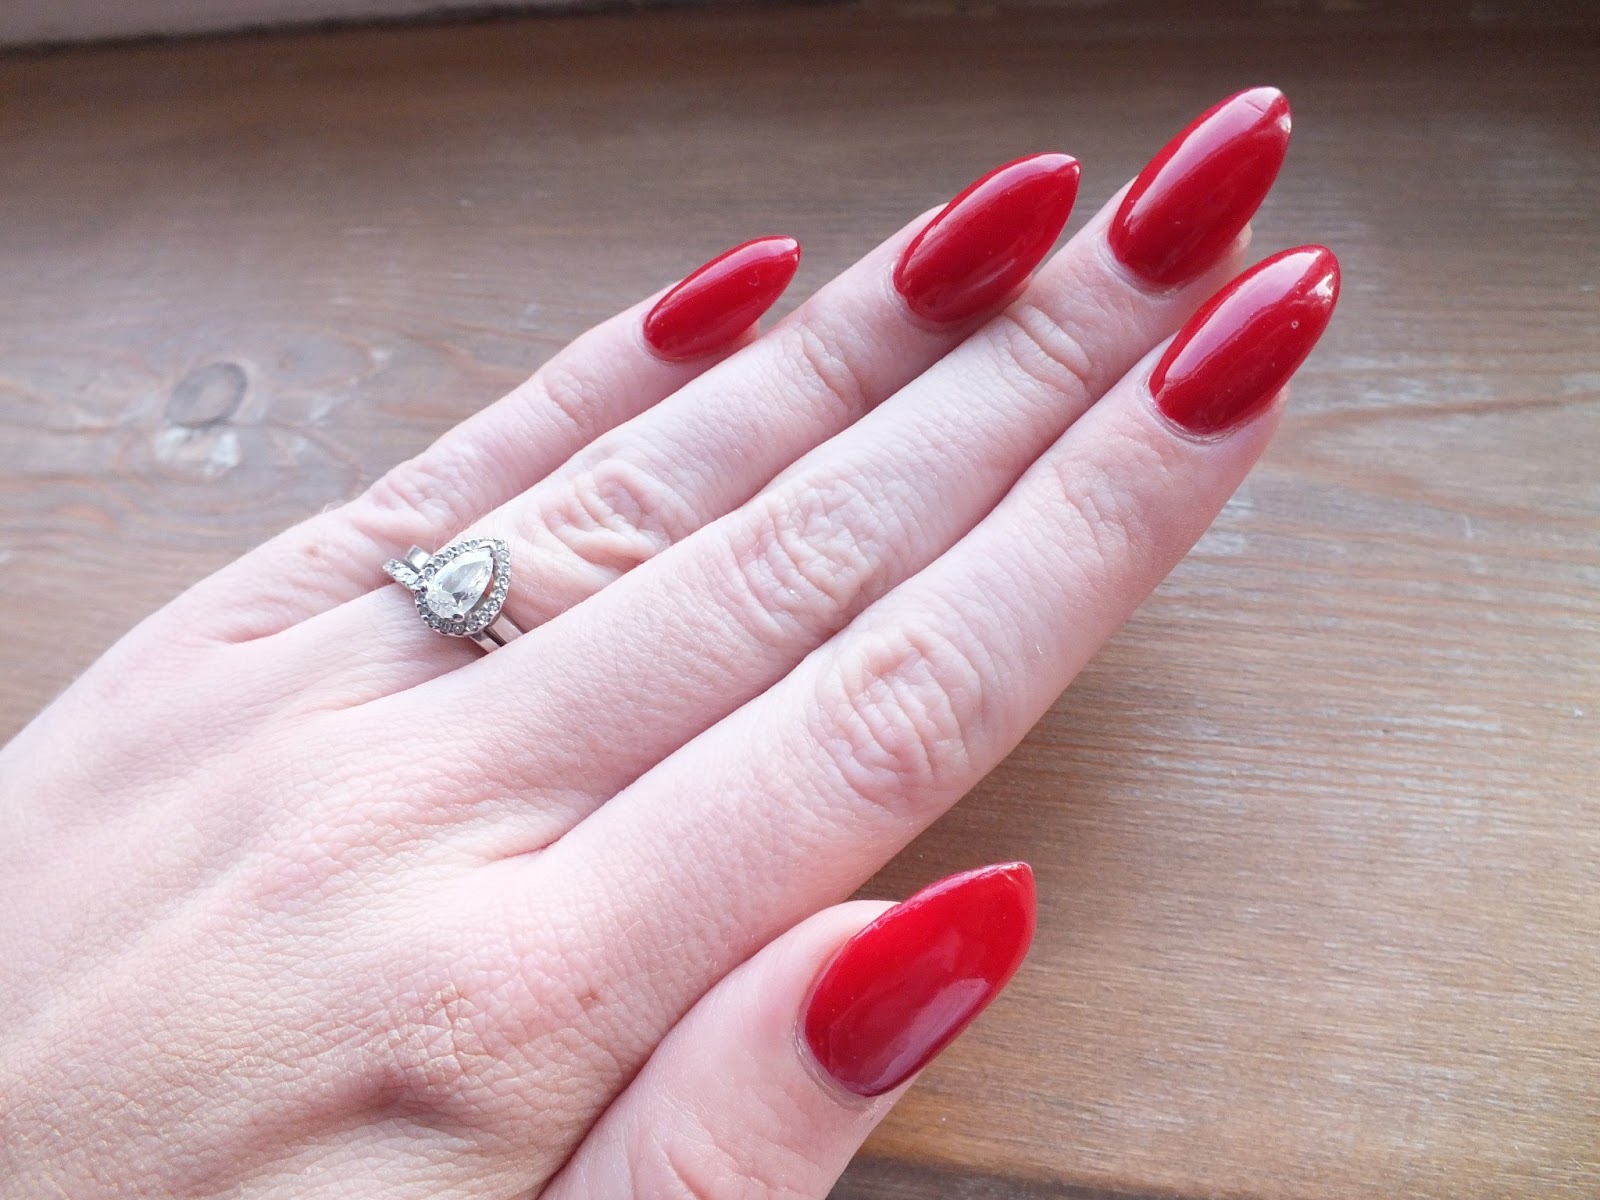 7. "Glamorous Pointy Nail Designs for a Night Out" - wide 6